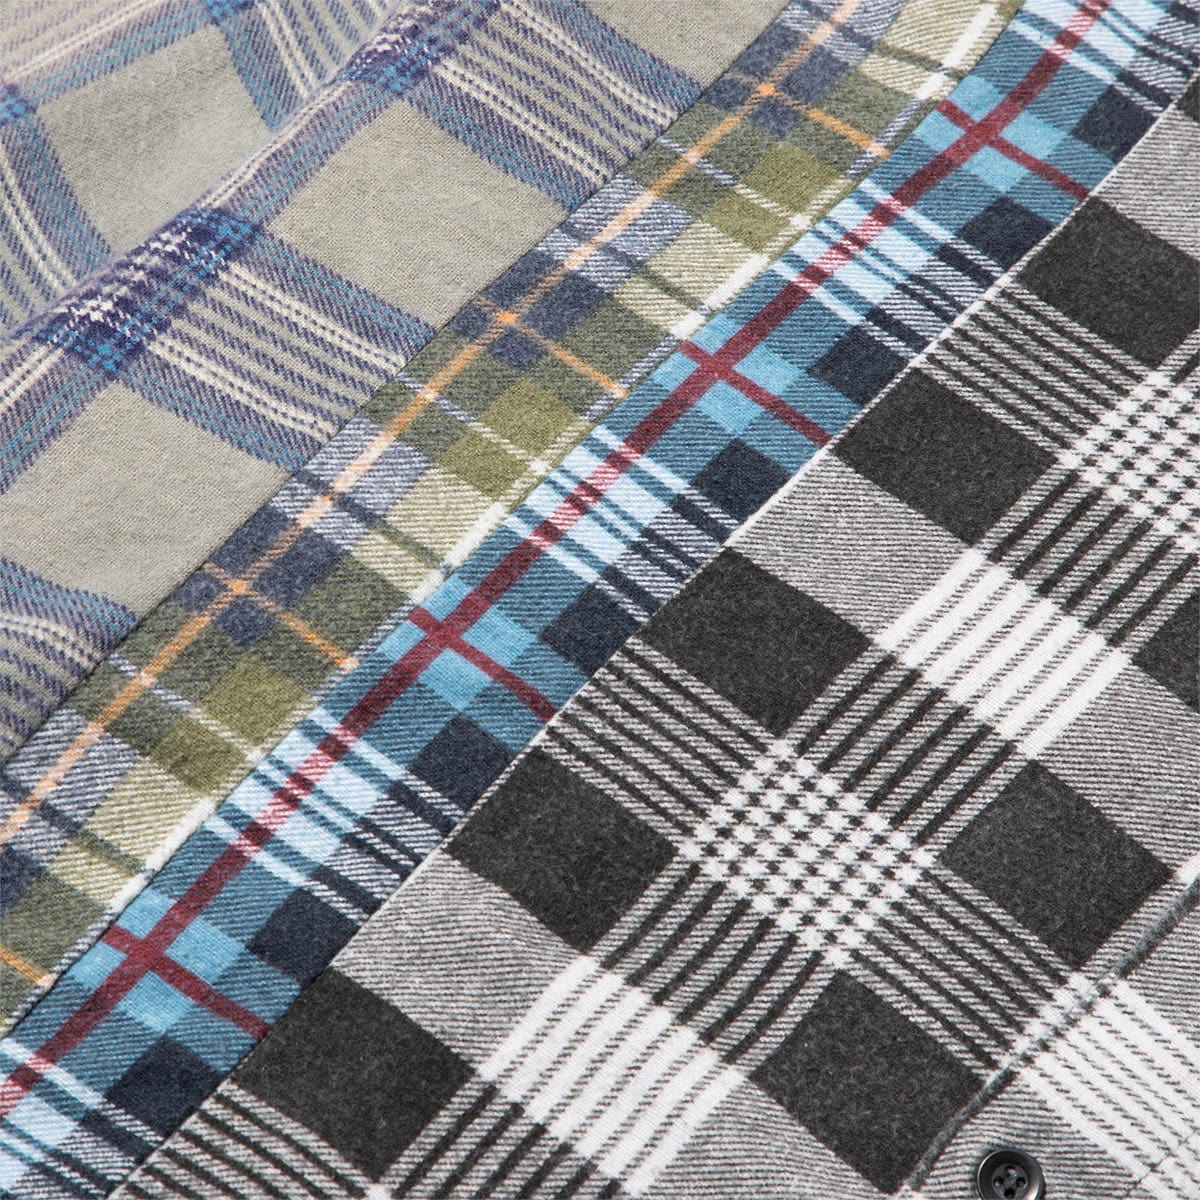 Needles Shirts ASSORTED / M 7 CUTS FLANNEL SHIRT SS21 13